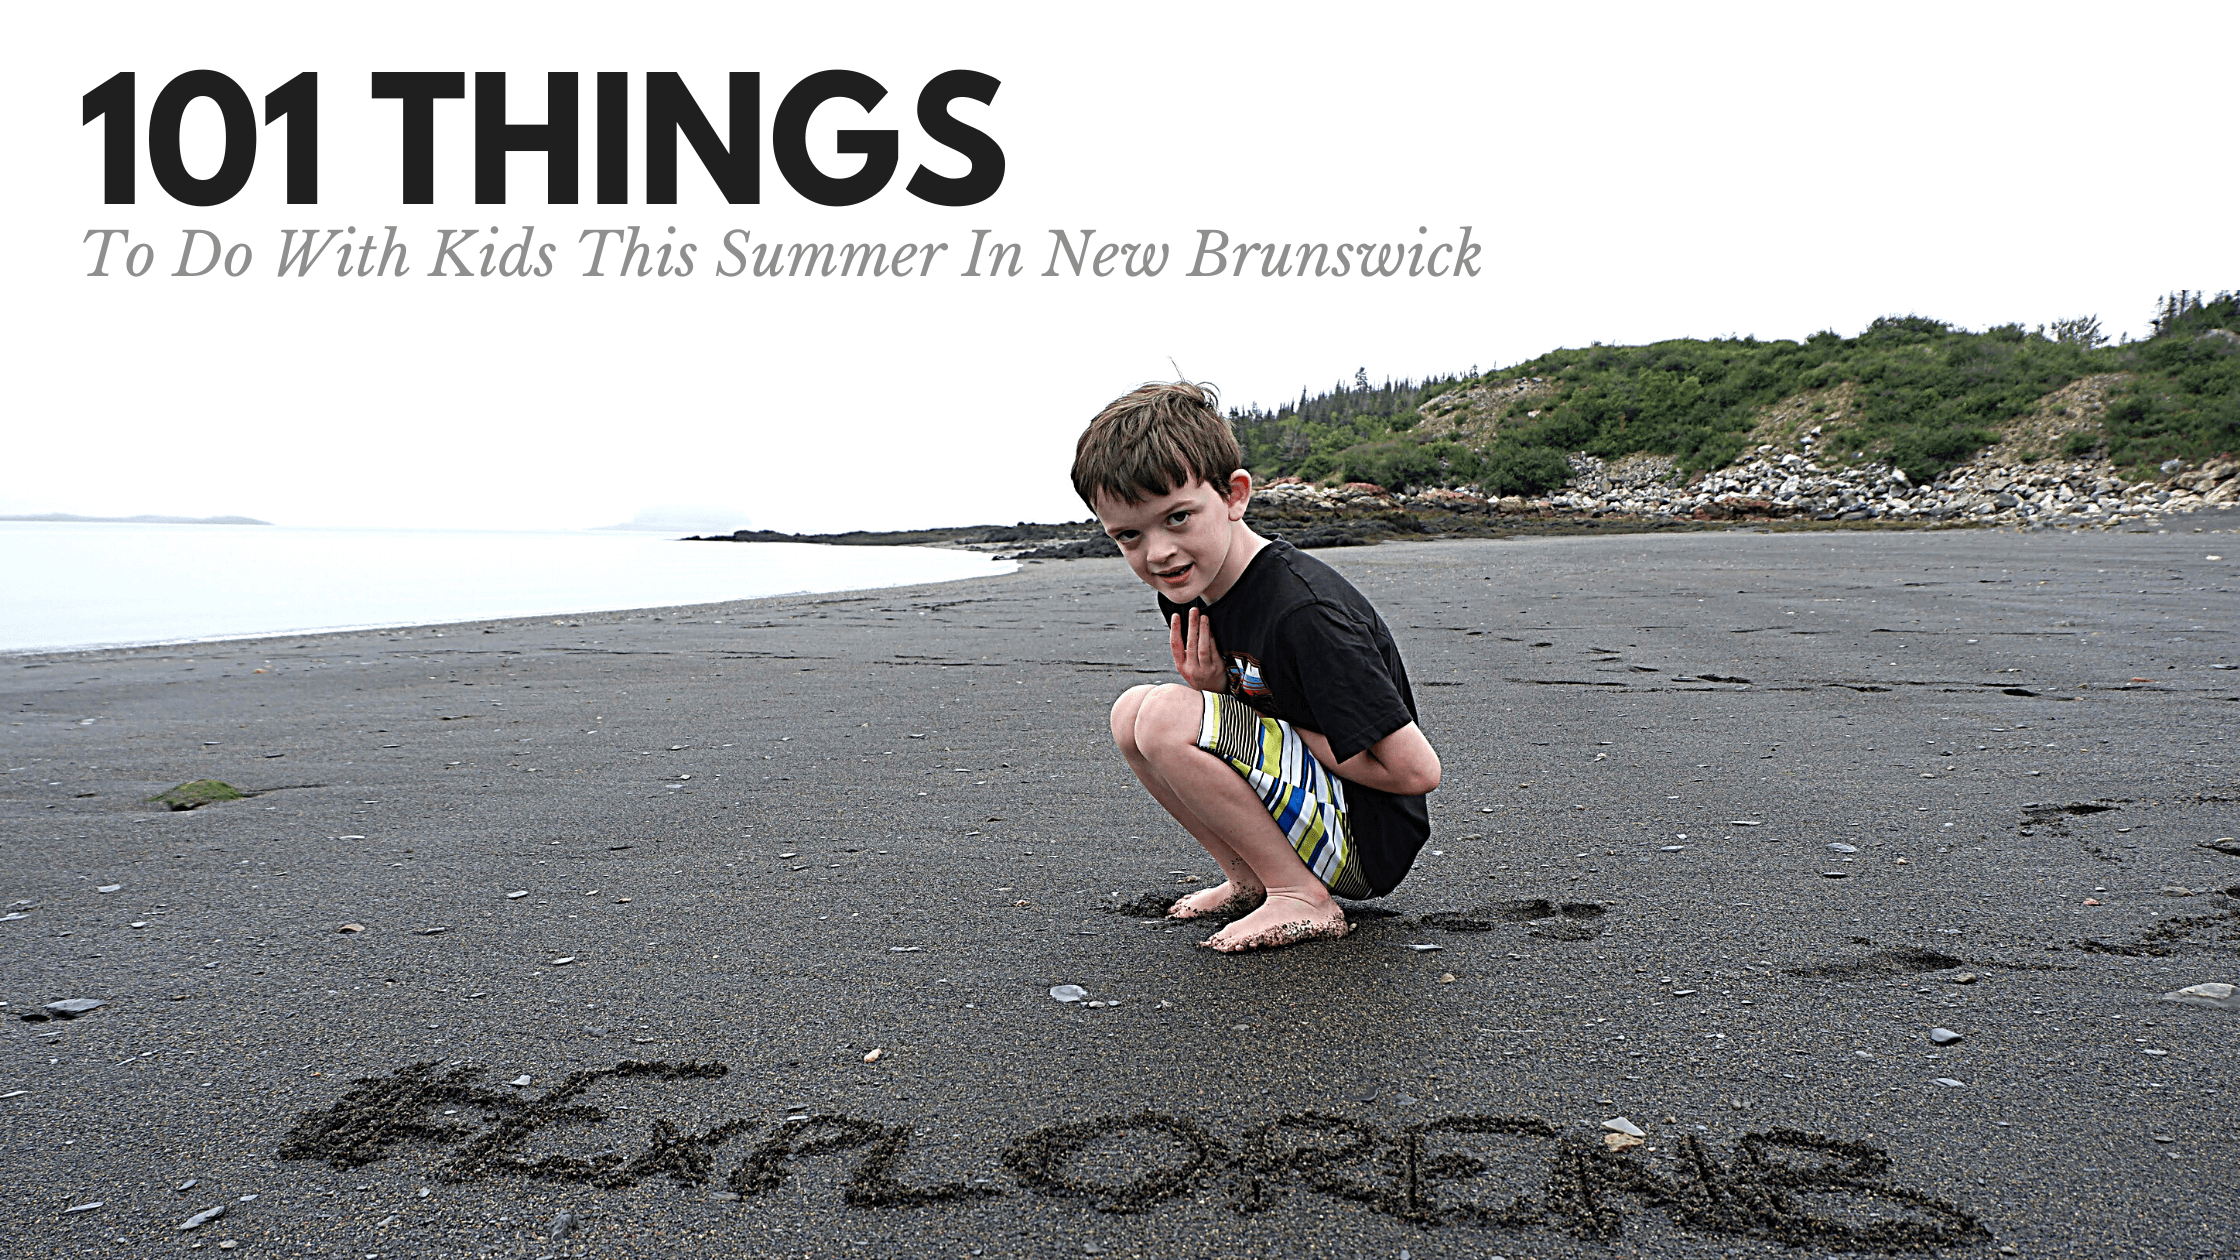 blog post with 101 ideas for exploring new brunswick with kids